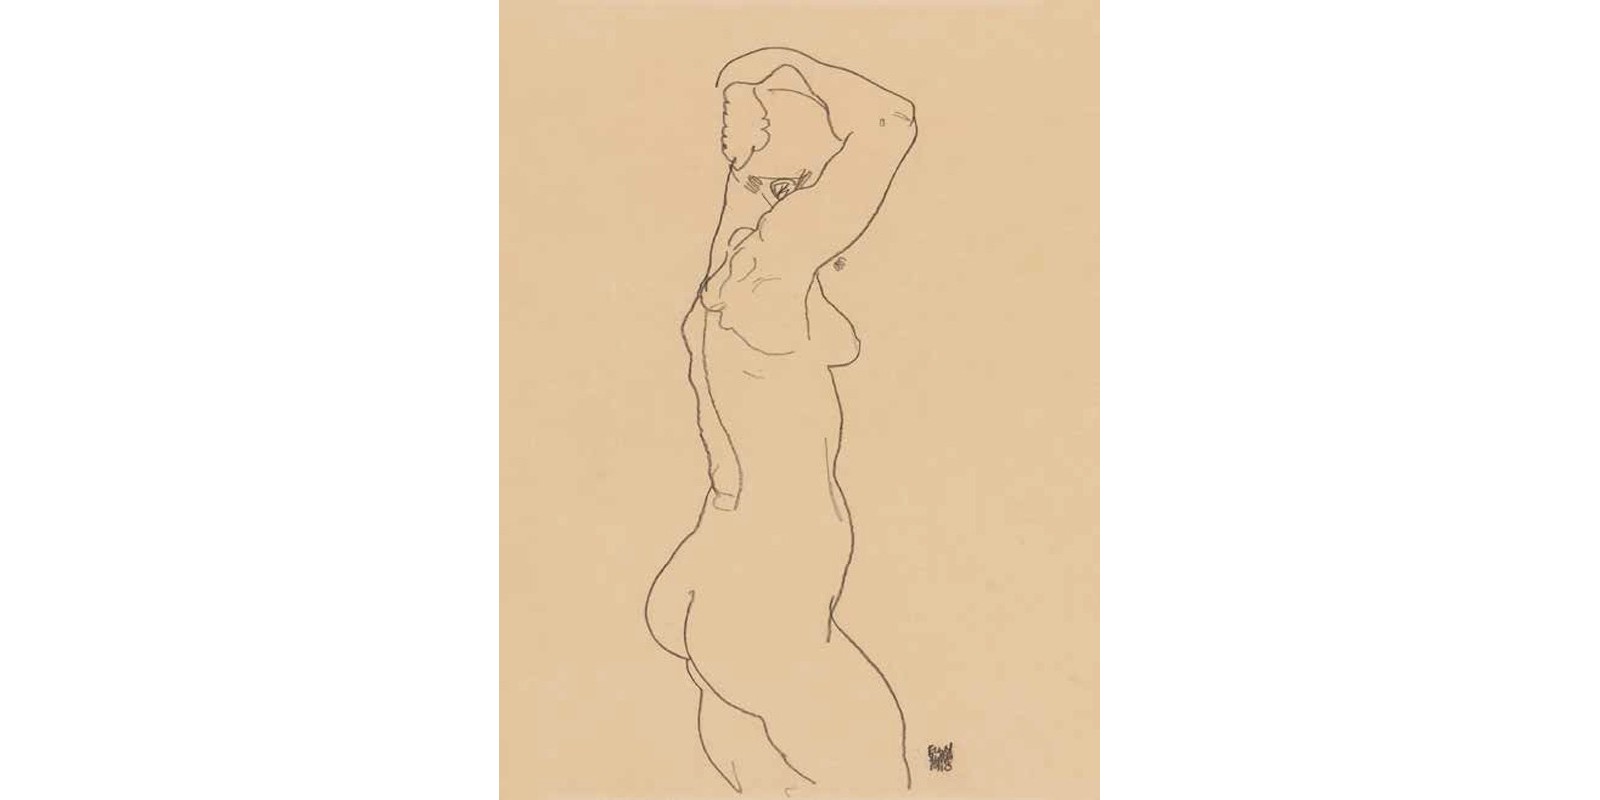 Egon Schiele - Standing Nude, Facing Right